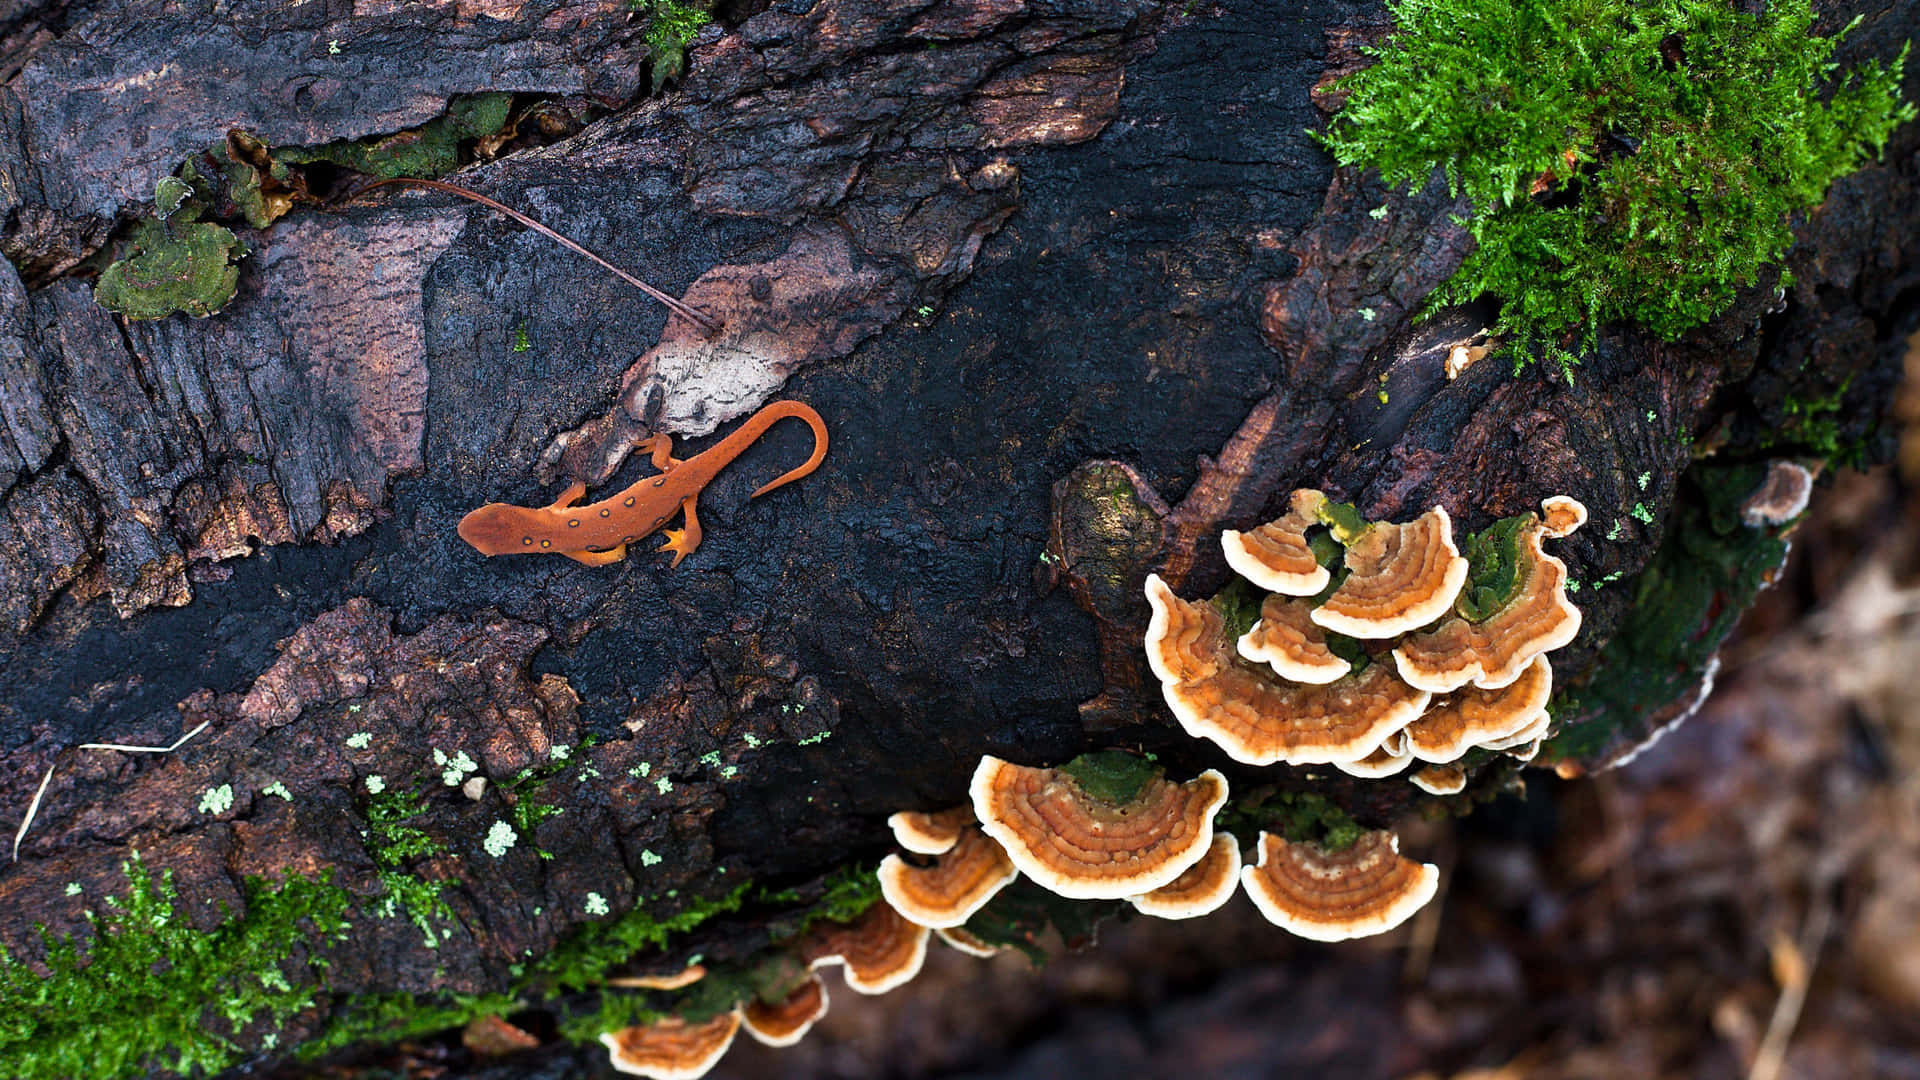 Newt_on_ Decaying_ Log_with_ Fungi_and_ Moss.jpg Wallpaper